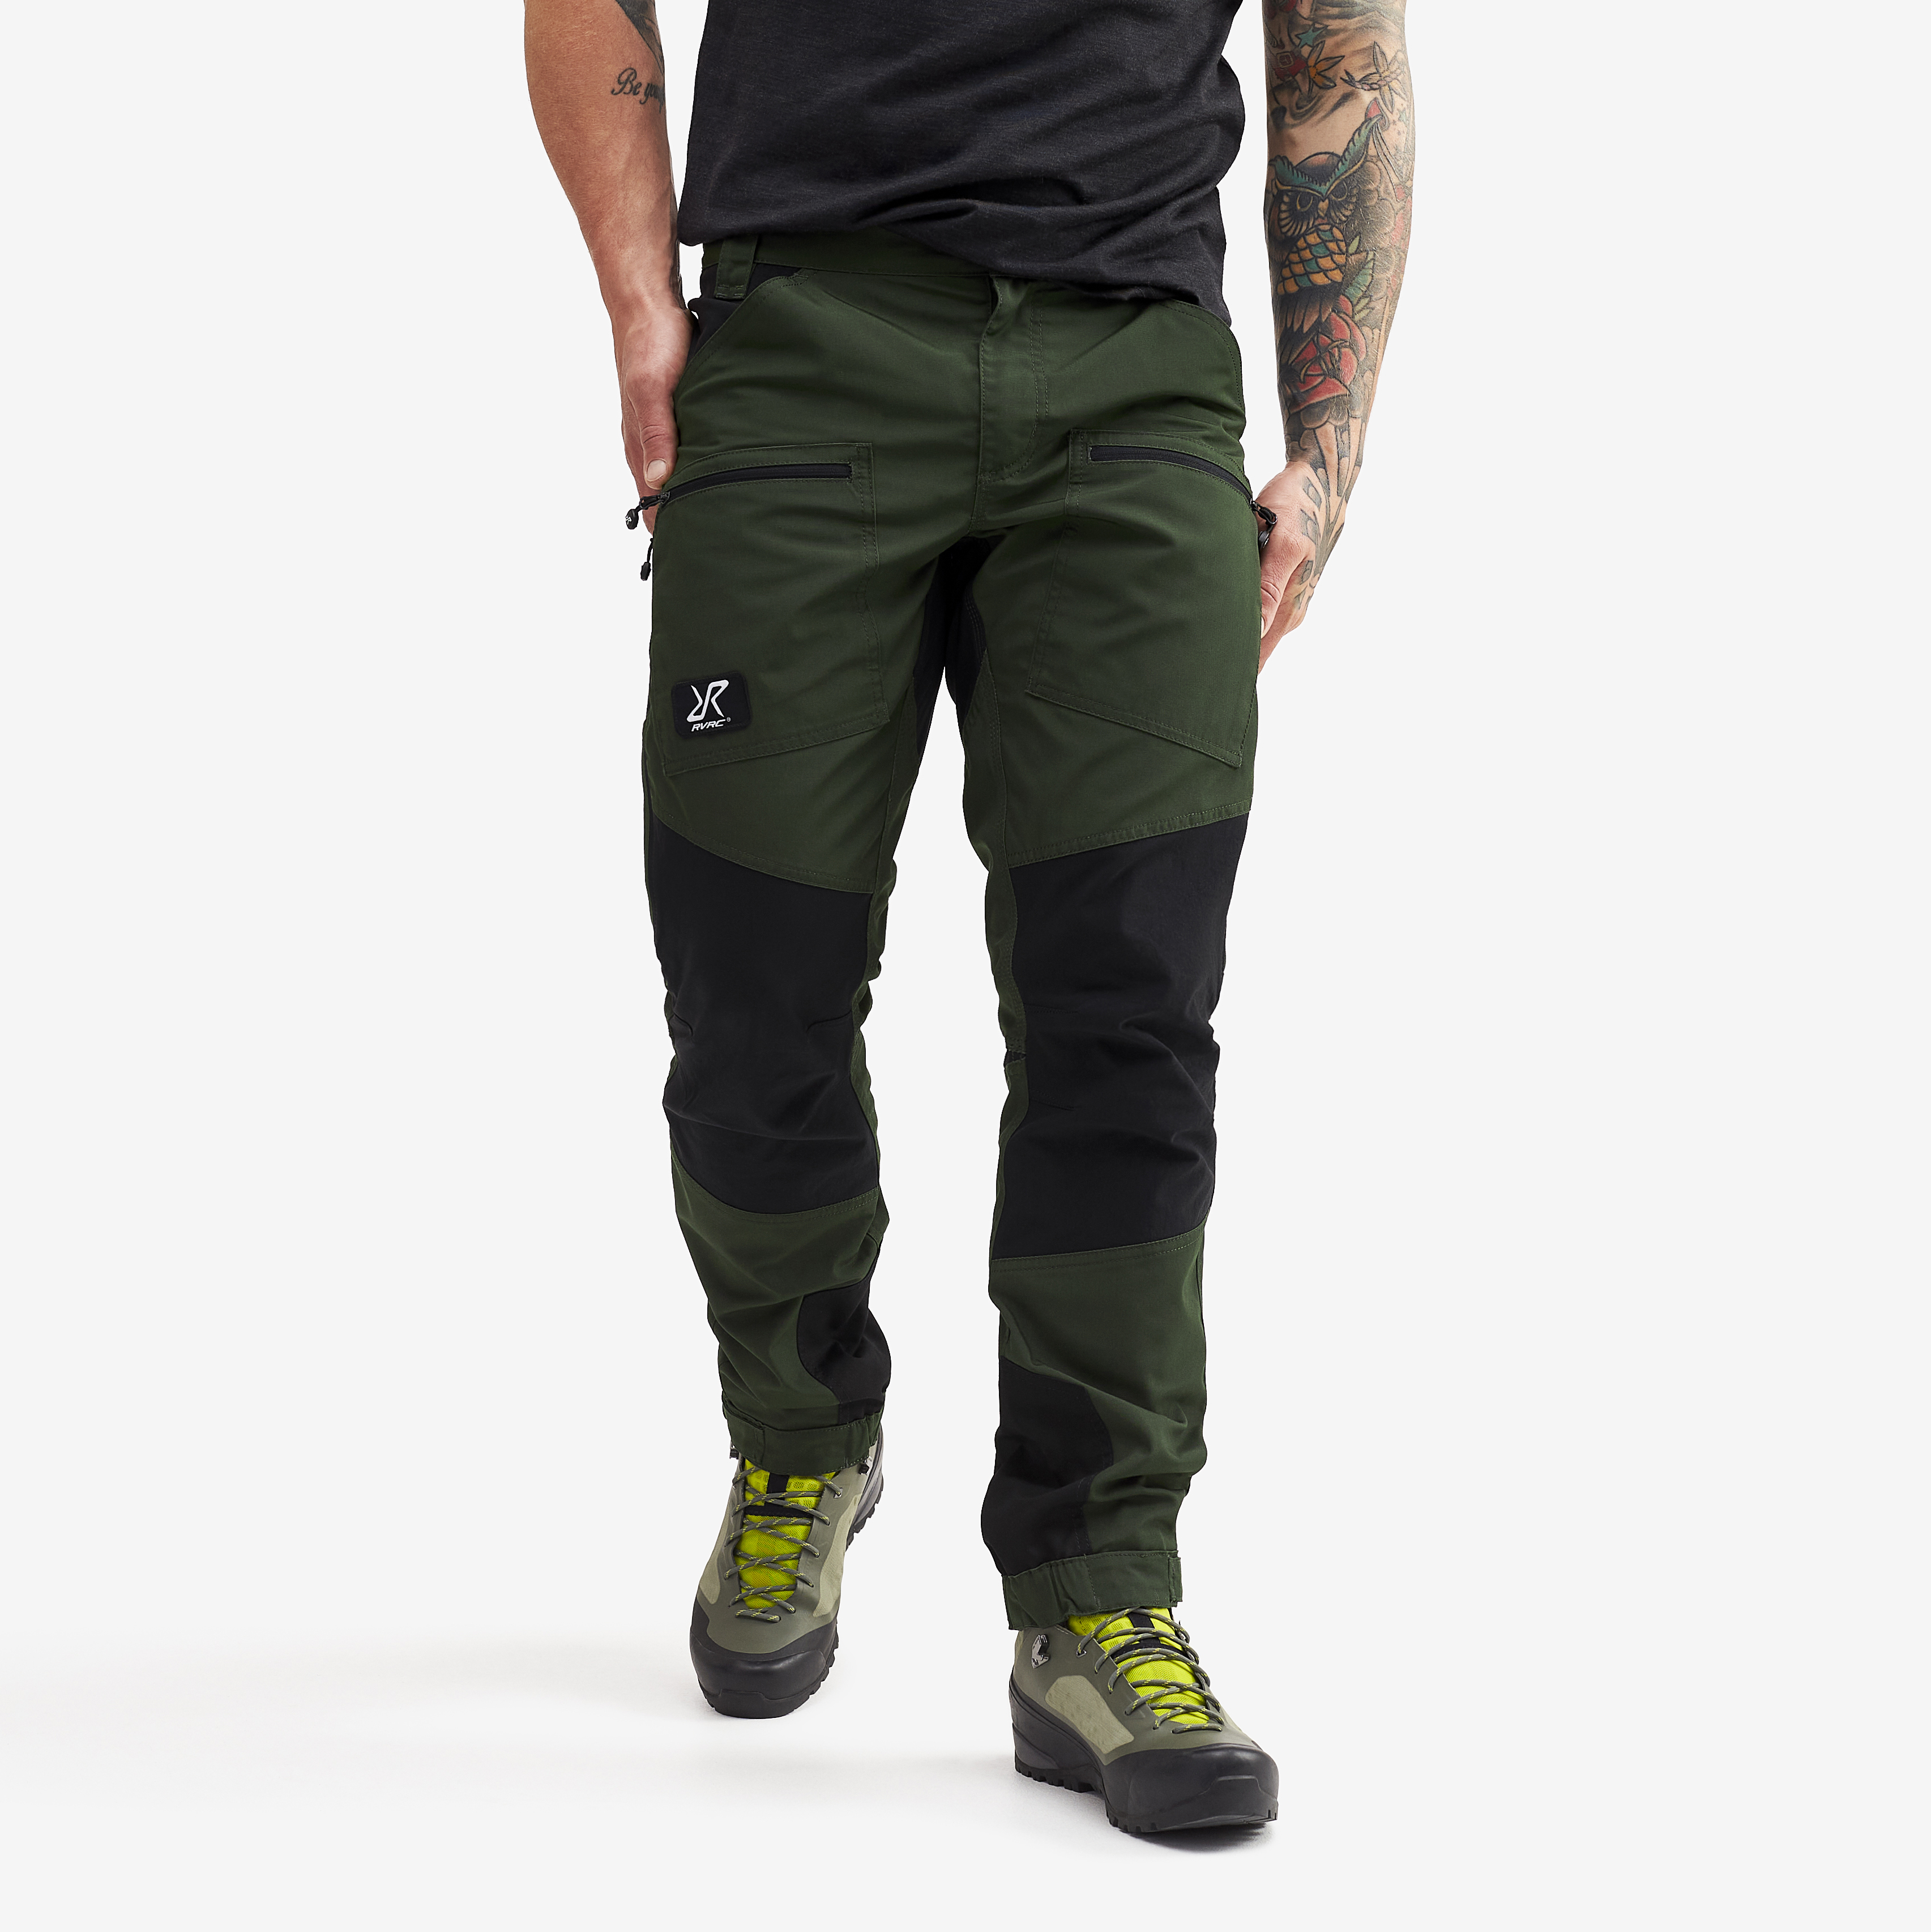 Nordwand Pro Short hiking pants for men in green